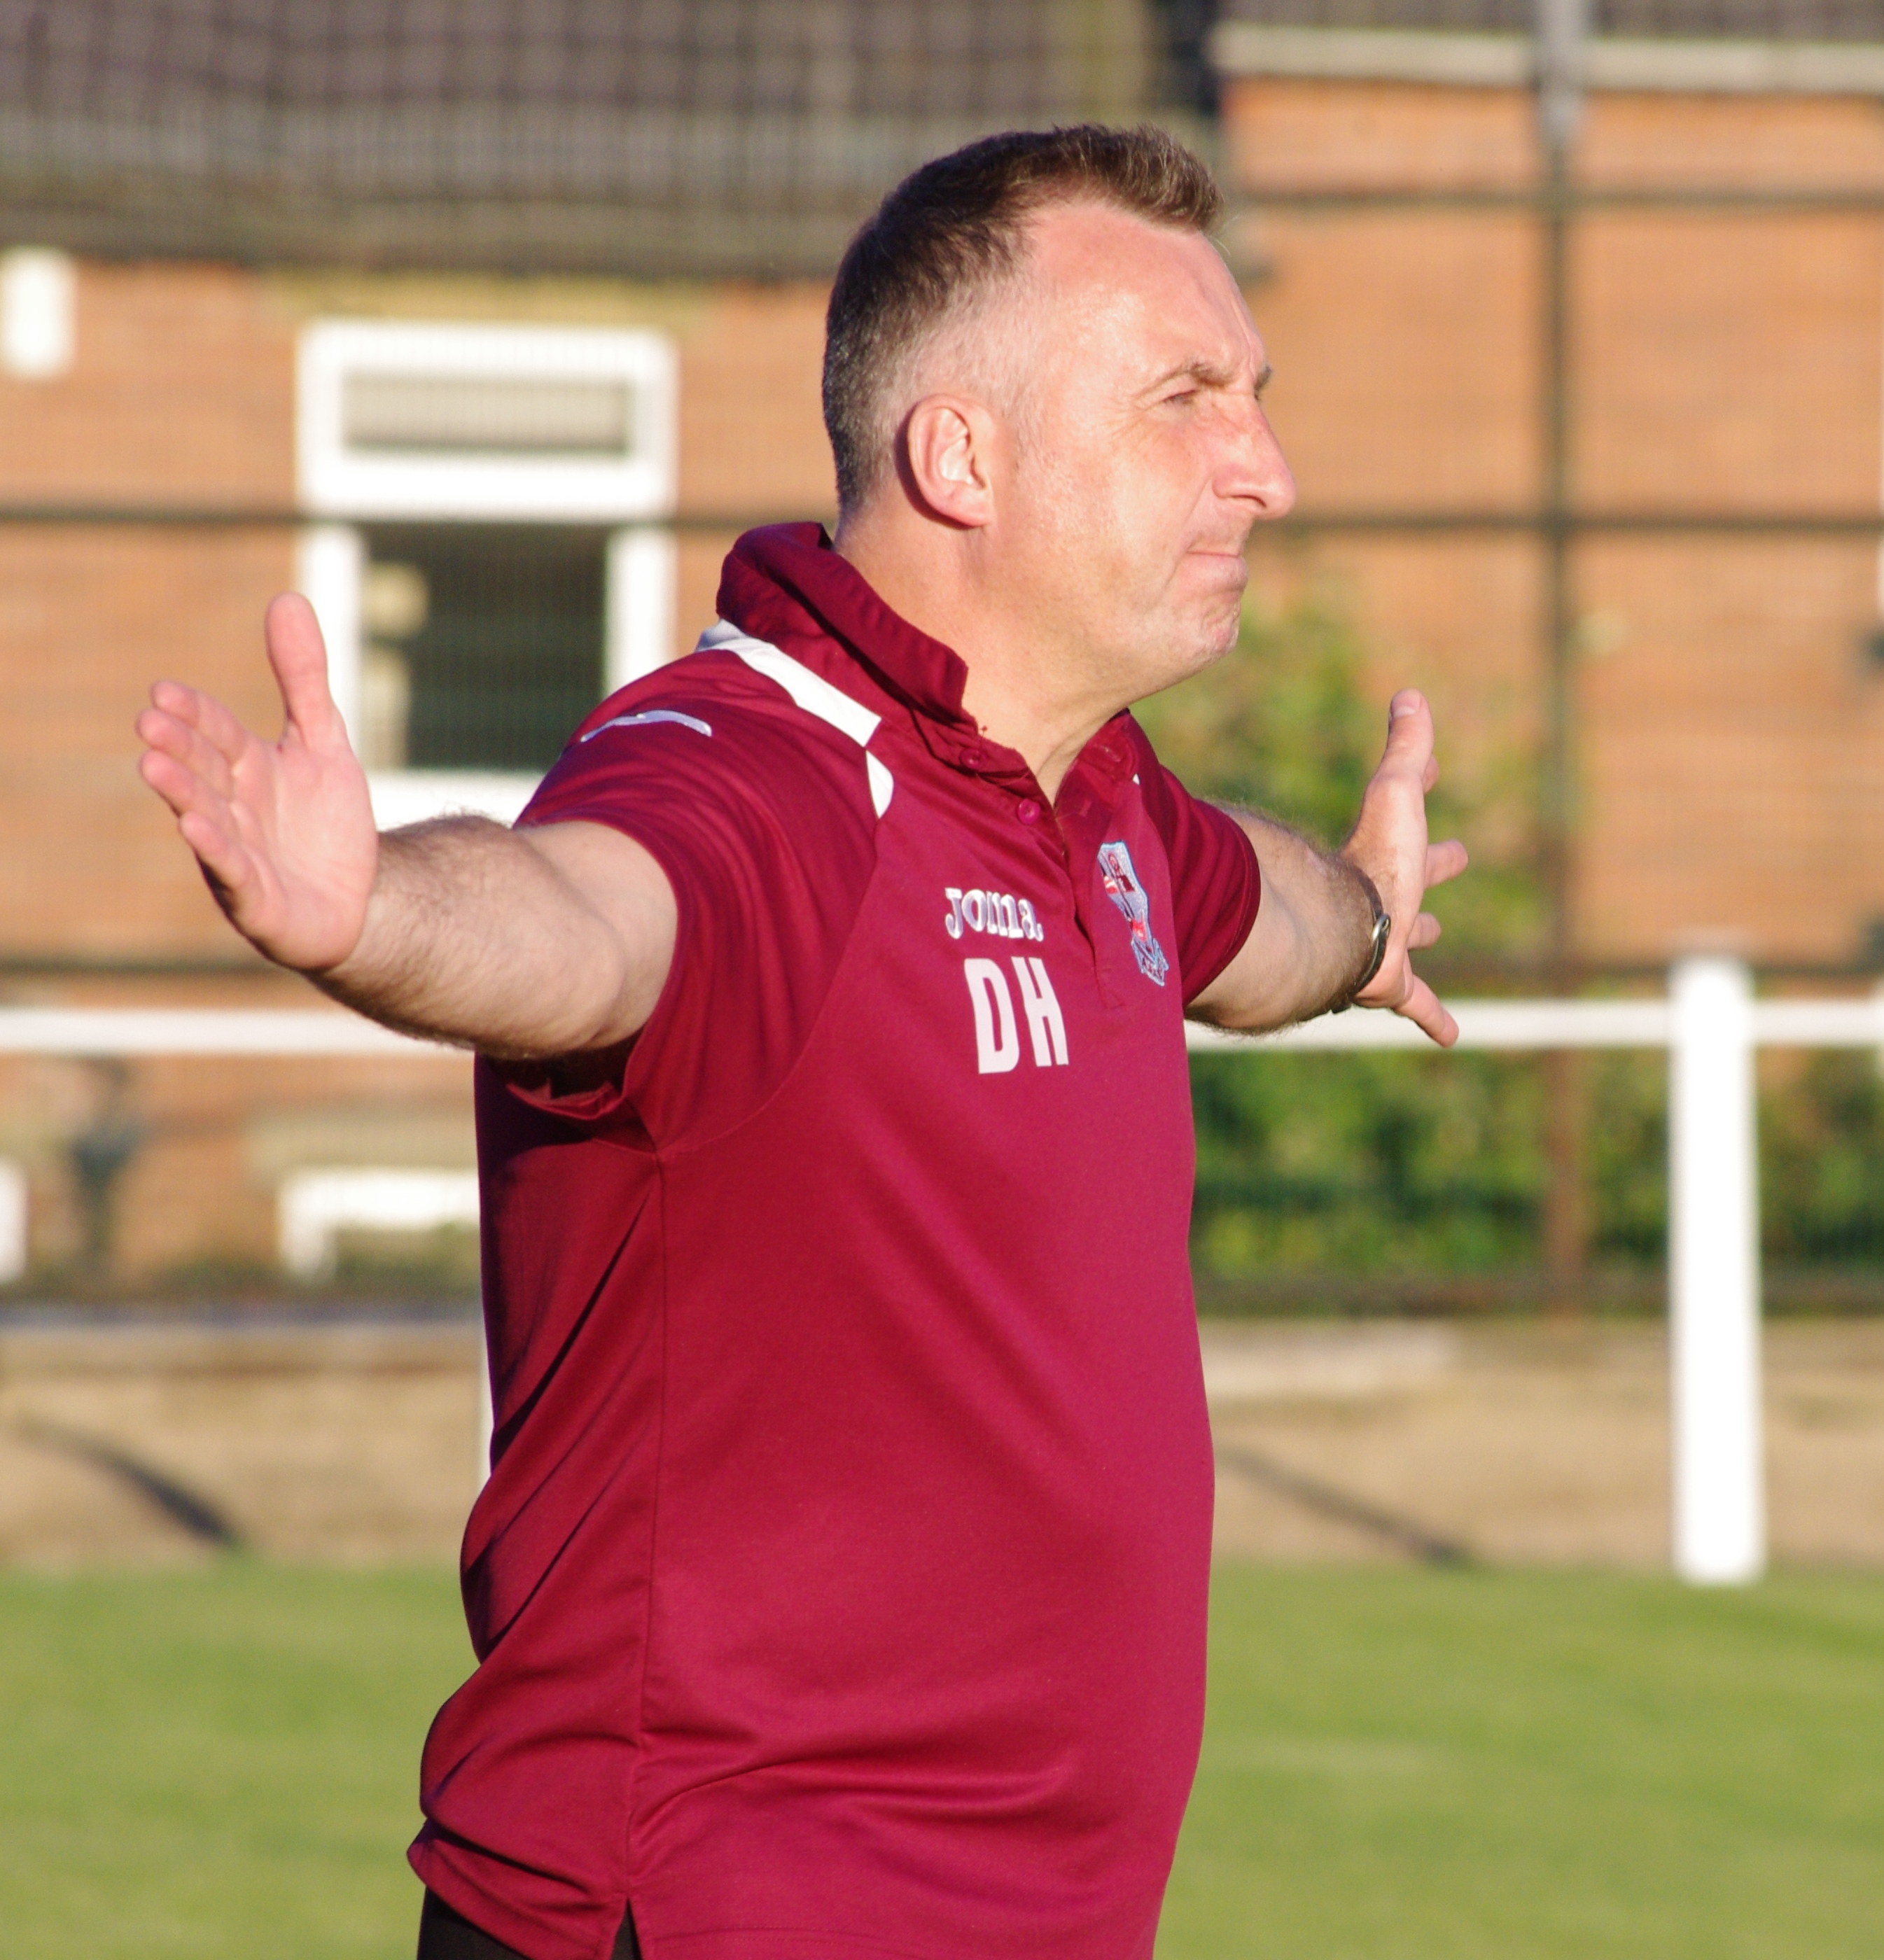 No pressure on us lads: That's the message from AFC Emley manager Darren Hepworth